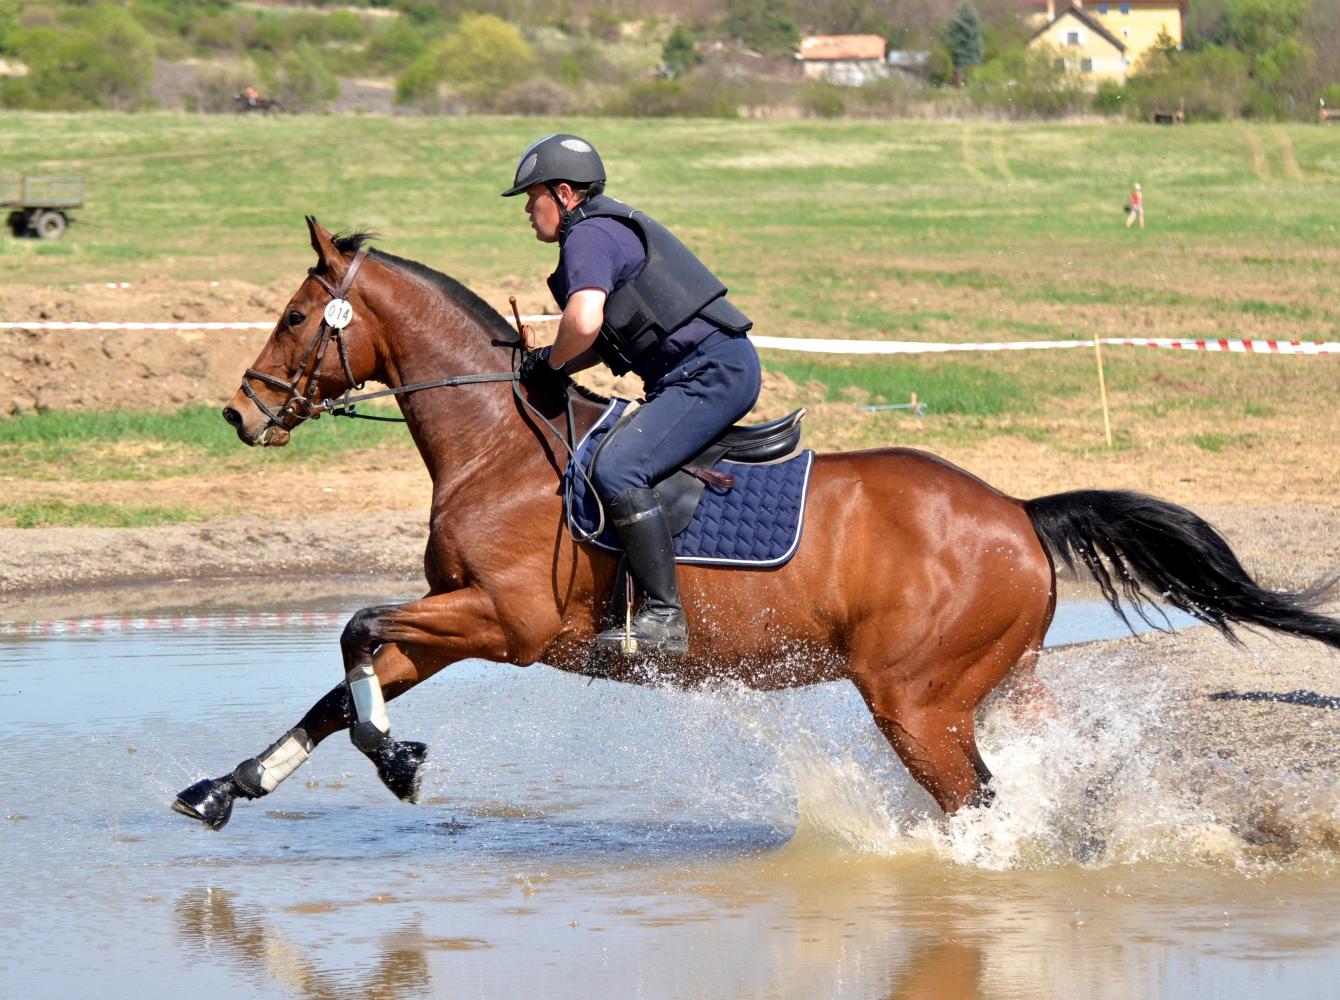 Rider and horse in the water during a Cross-country